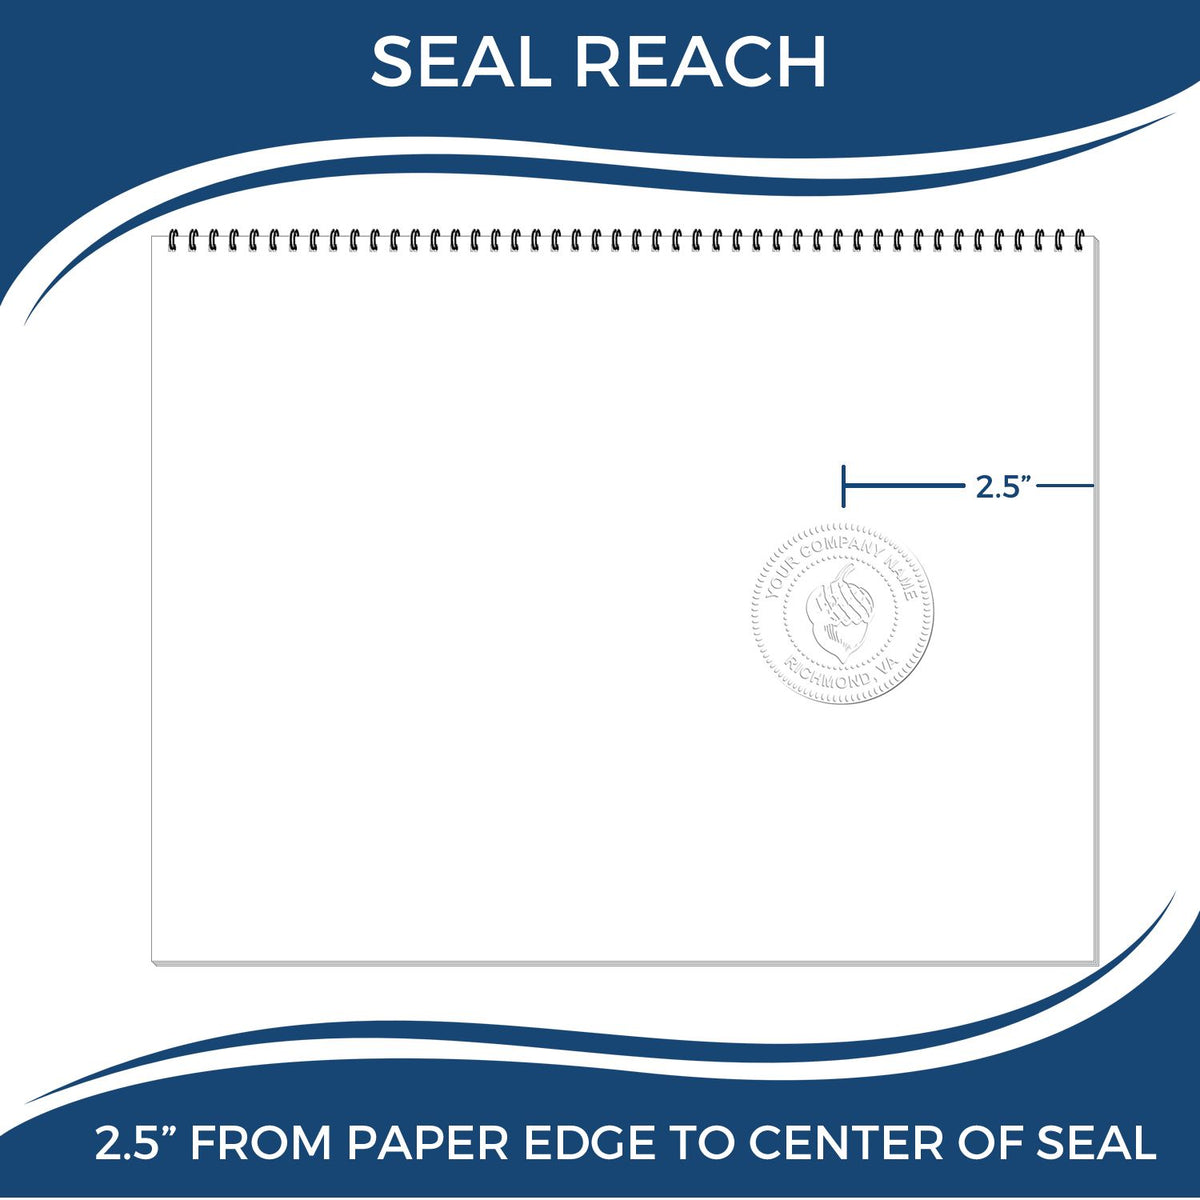 An infographic showing the seal reach which is represented by a ruler and a miniature seal image of the State of Mississippi Long Reach Architectural Embossing Seal